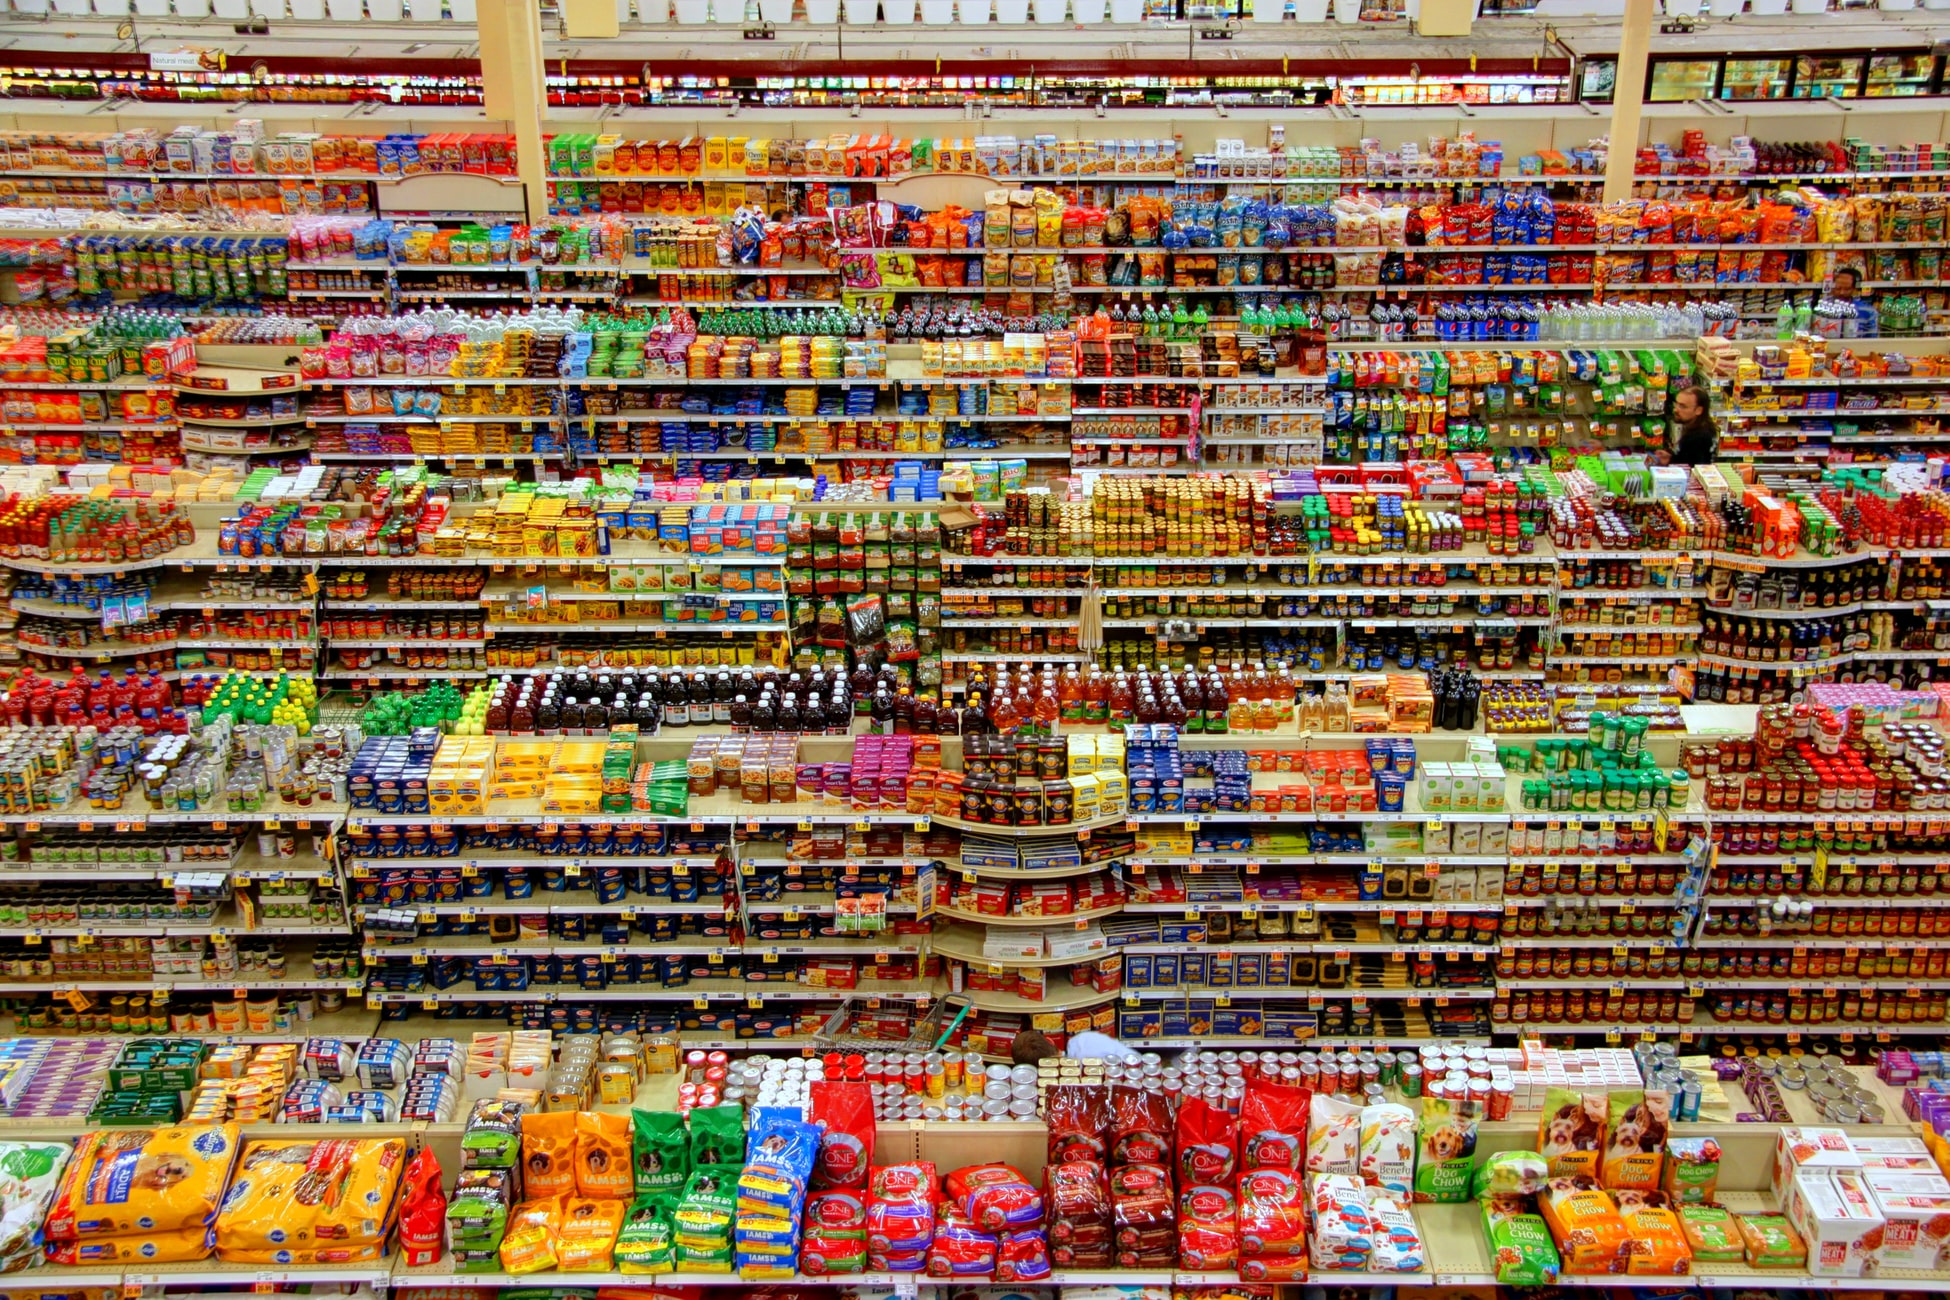 Groceries section of the Fred Meyer superstore in Redmond, WA. Credit: Peter Bond